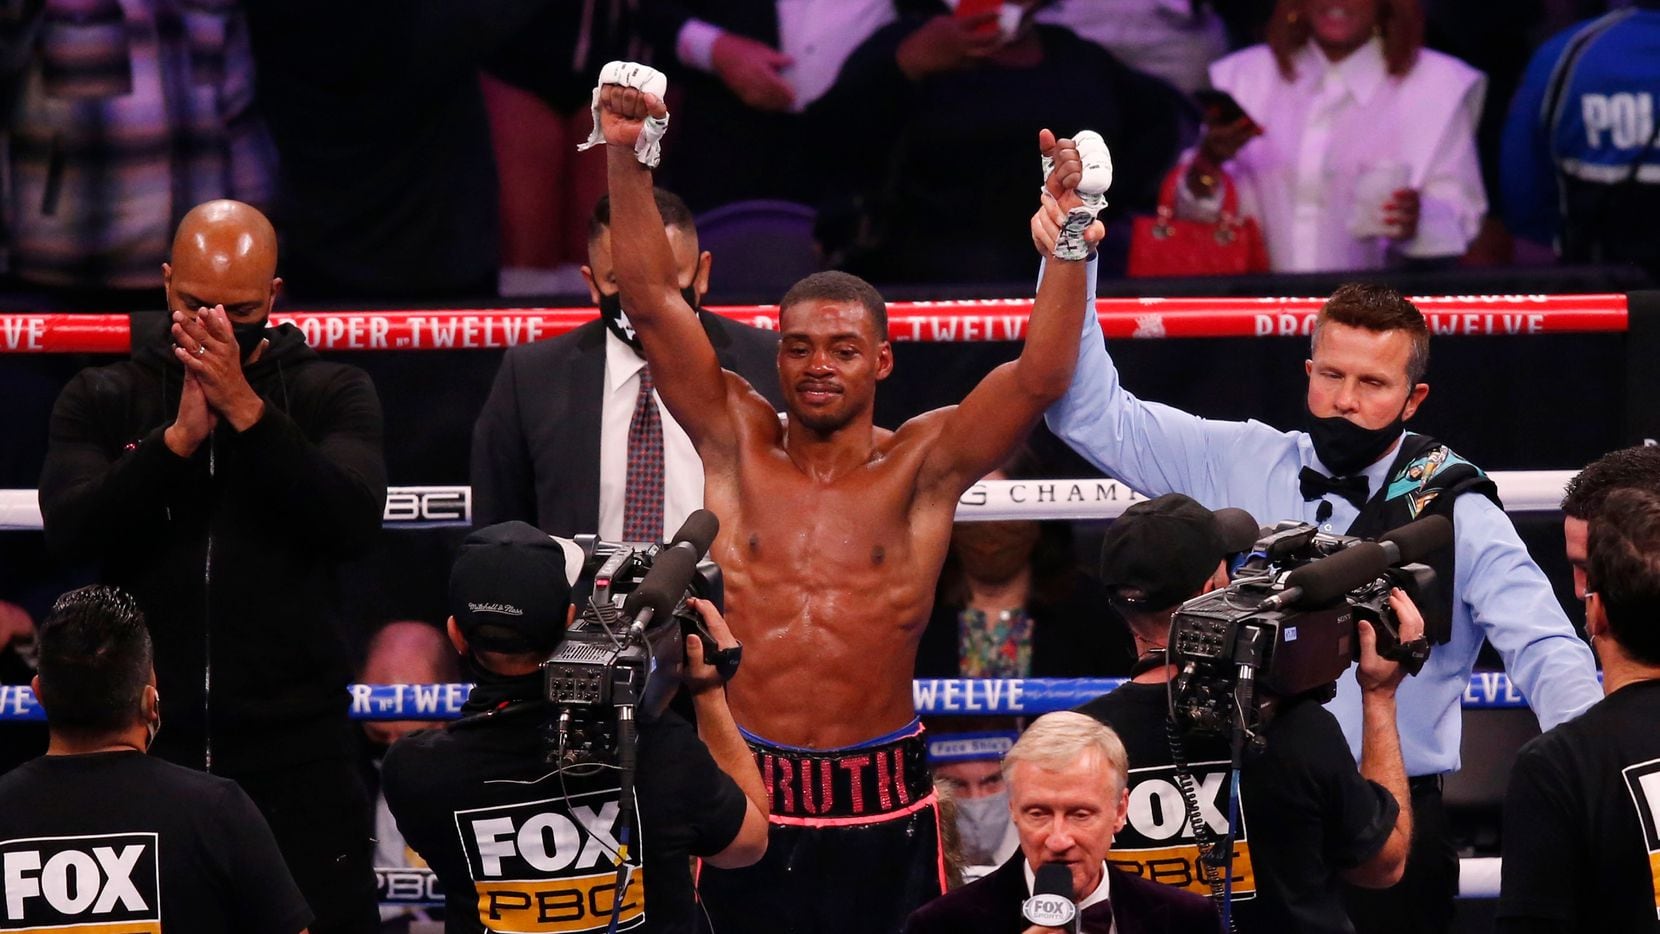 Errol Spence, Jr. is named the winner against Danny García in a WBC & IBF World Welterweight Championship boxing match at AT&T Stadium on Saturday, December 5, 2020 in Arlington, Texas. Spence Jr. won by unanimous decision in 12 rounds.